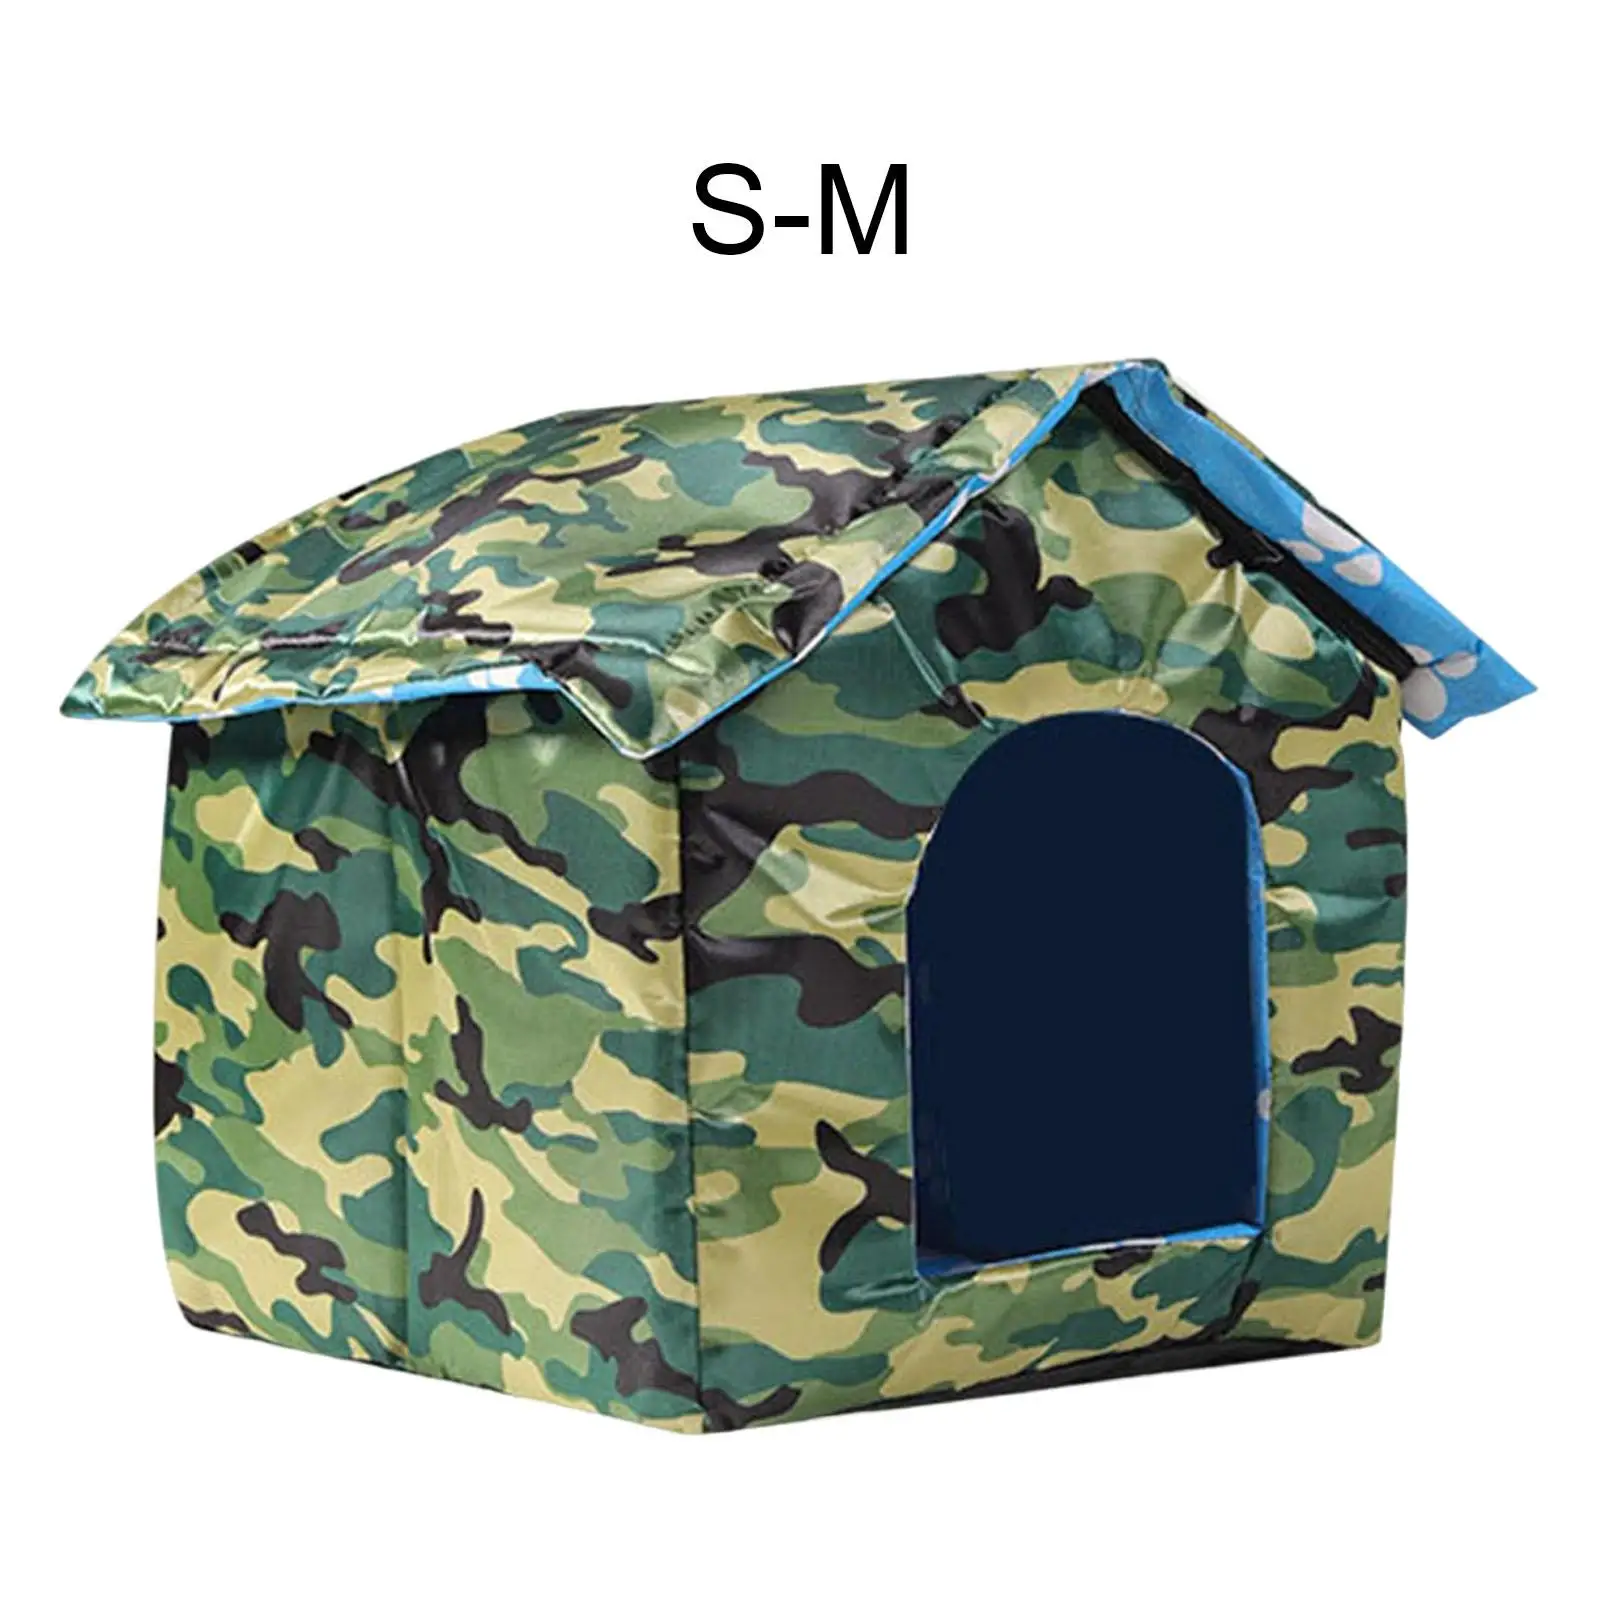 Stray Cats Shelter Pet House Outside with Removable Roof Puppy Kitten Cave